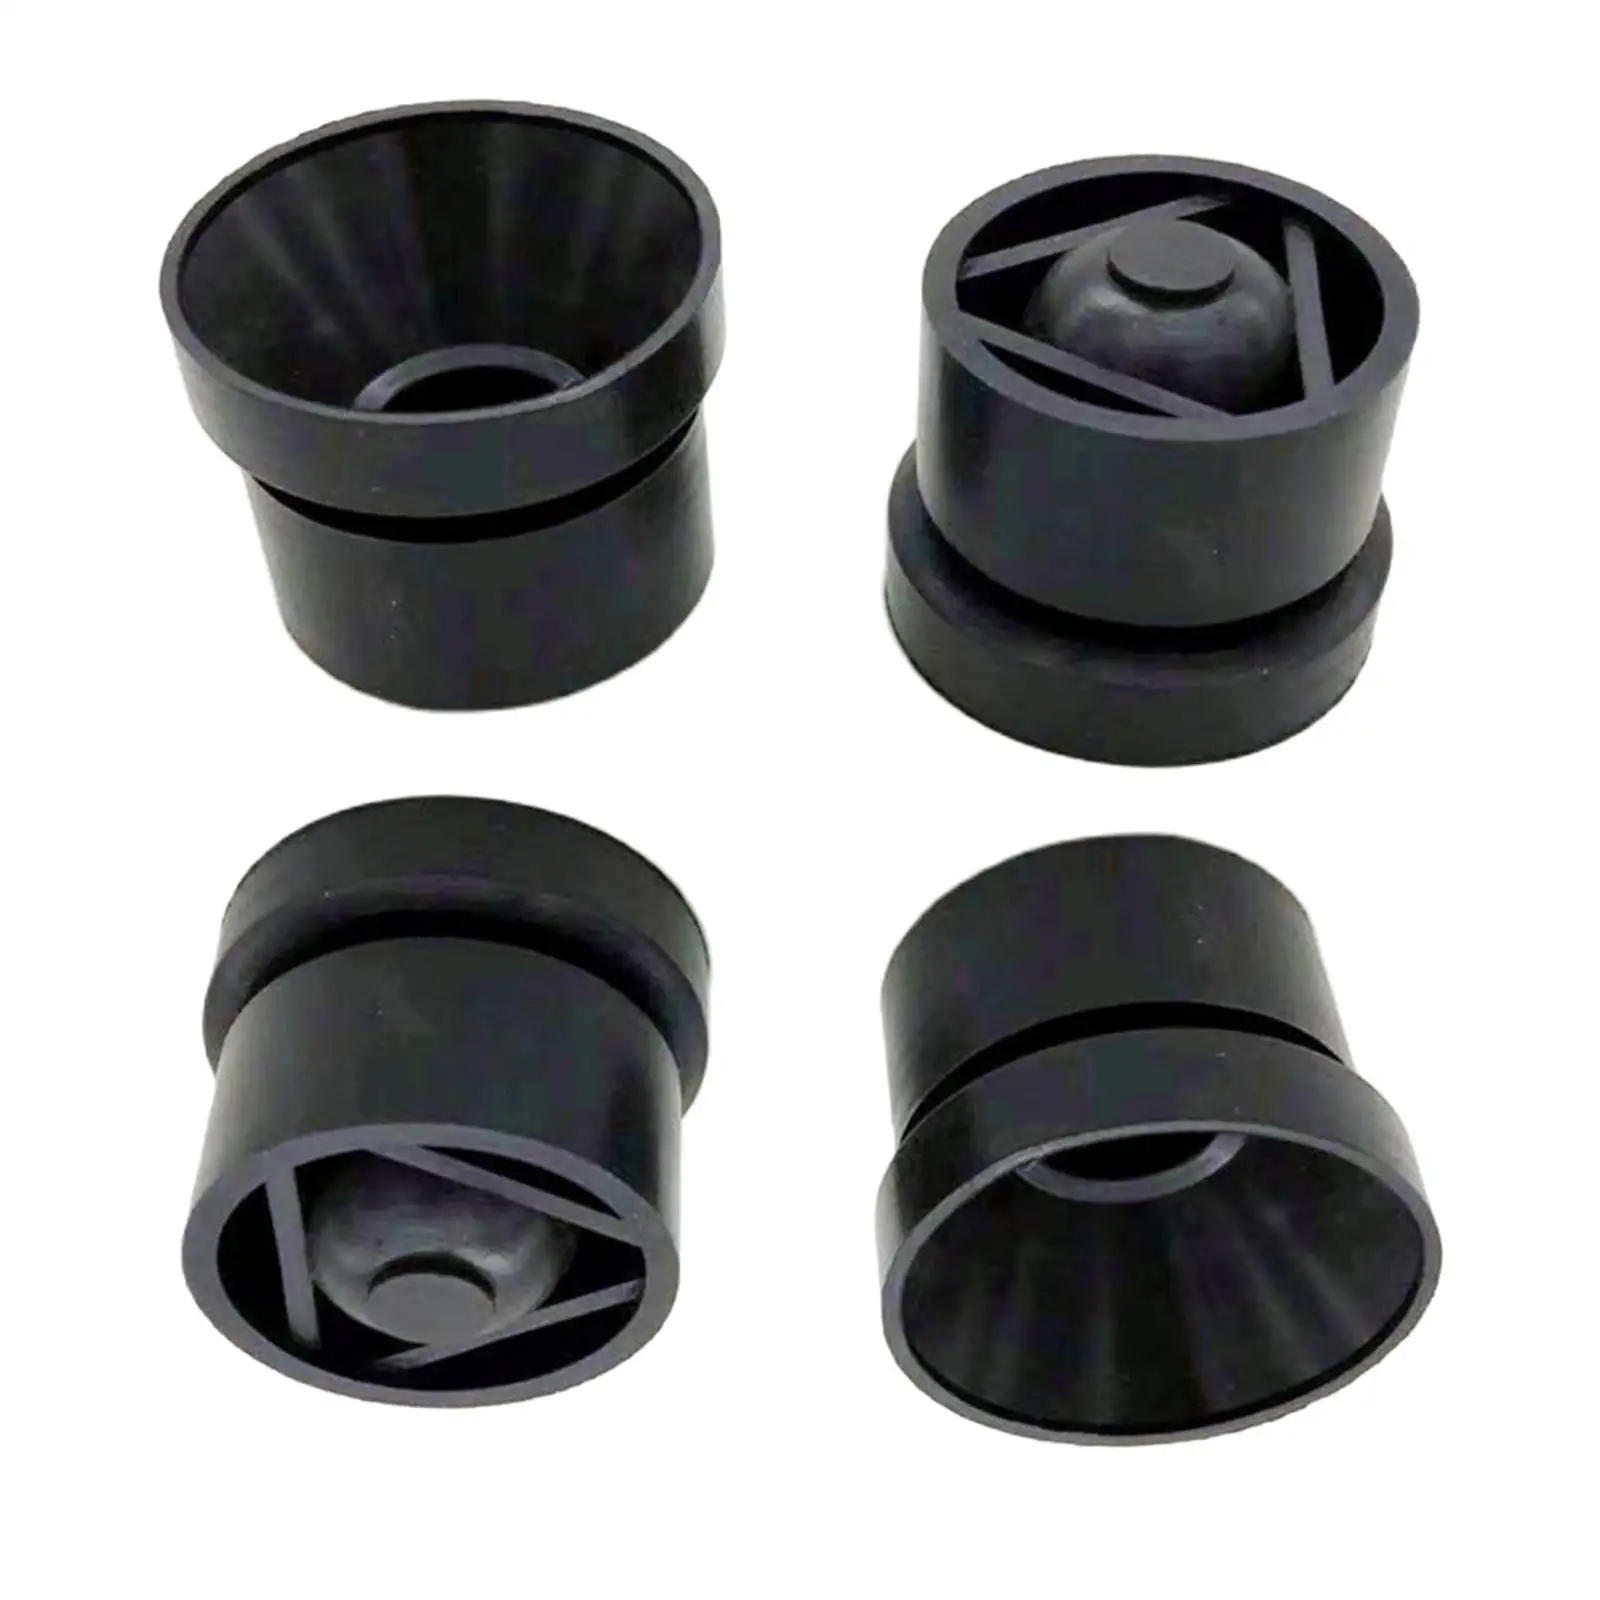 Rubber Jounce Bumper Engine Cover Stop Buffer 06A103226 Accessories for VW